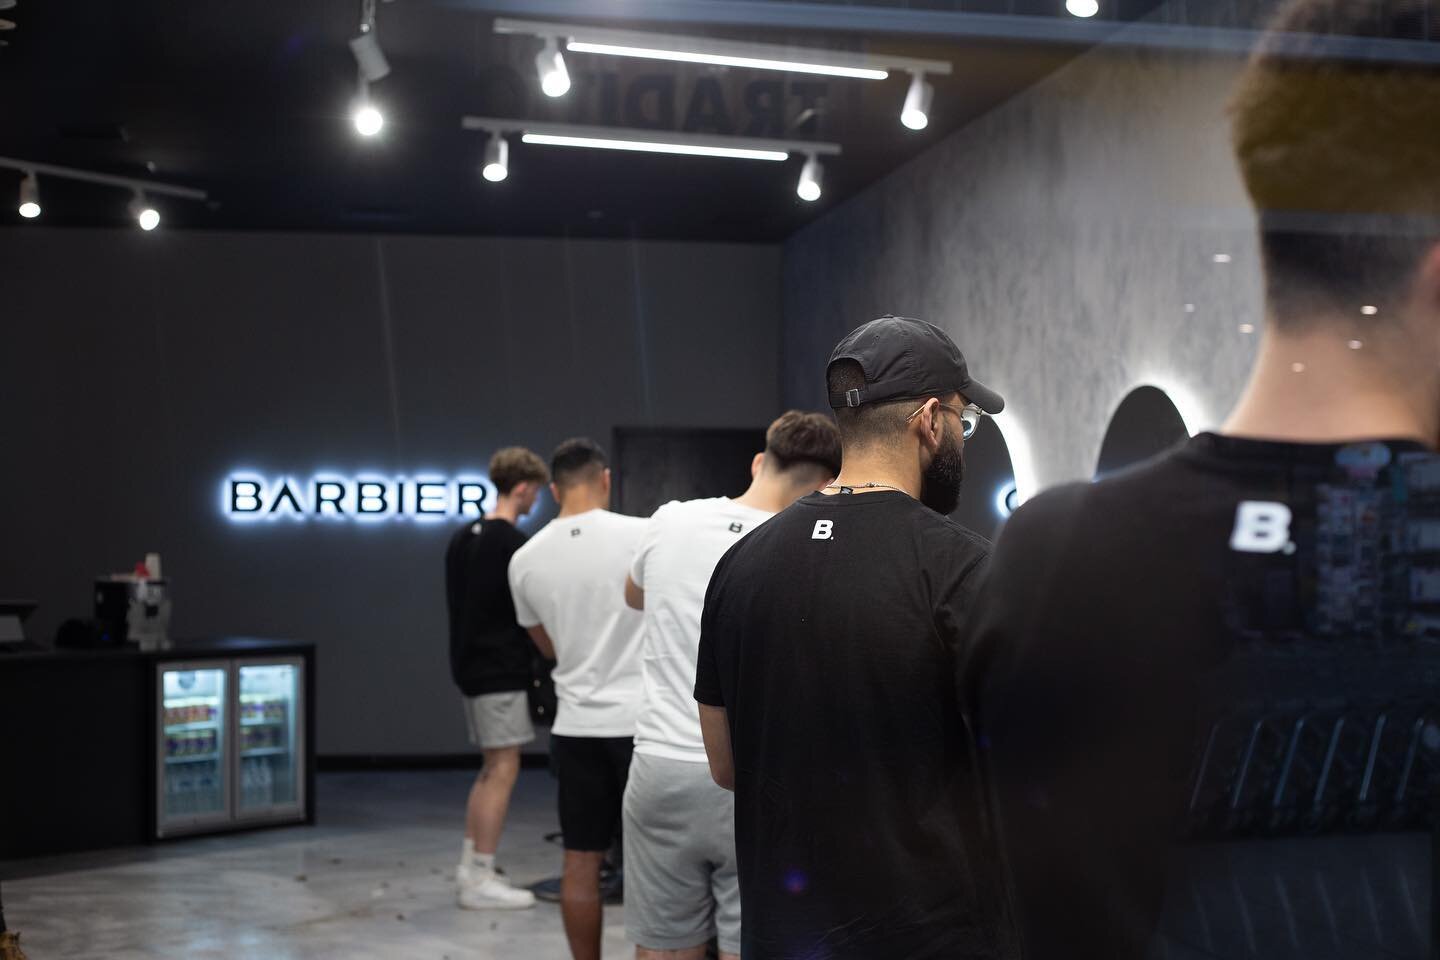 The BARBIERO Team. 

Our focus is assisting clients in identifying their unique sense of style and expertly personalising our quality of service to their requirements and vision. 

Come down and experience the difference. 

📍 325 Hancock Rd, Fairvie